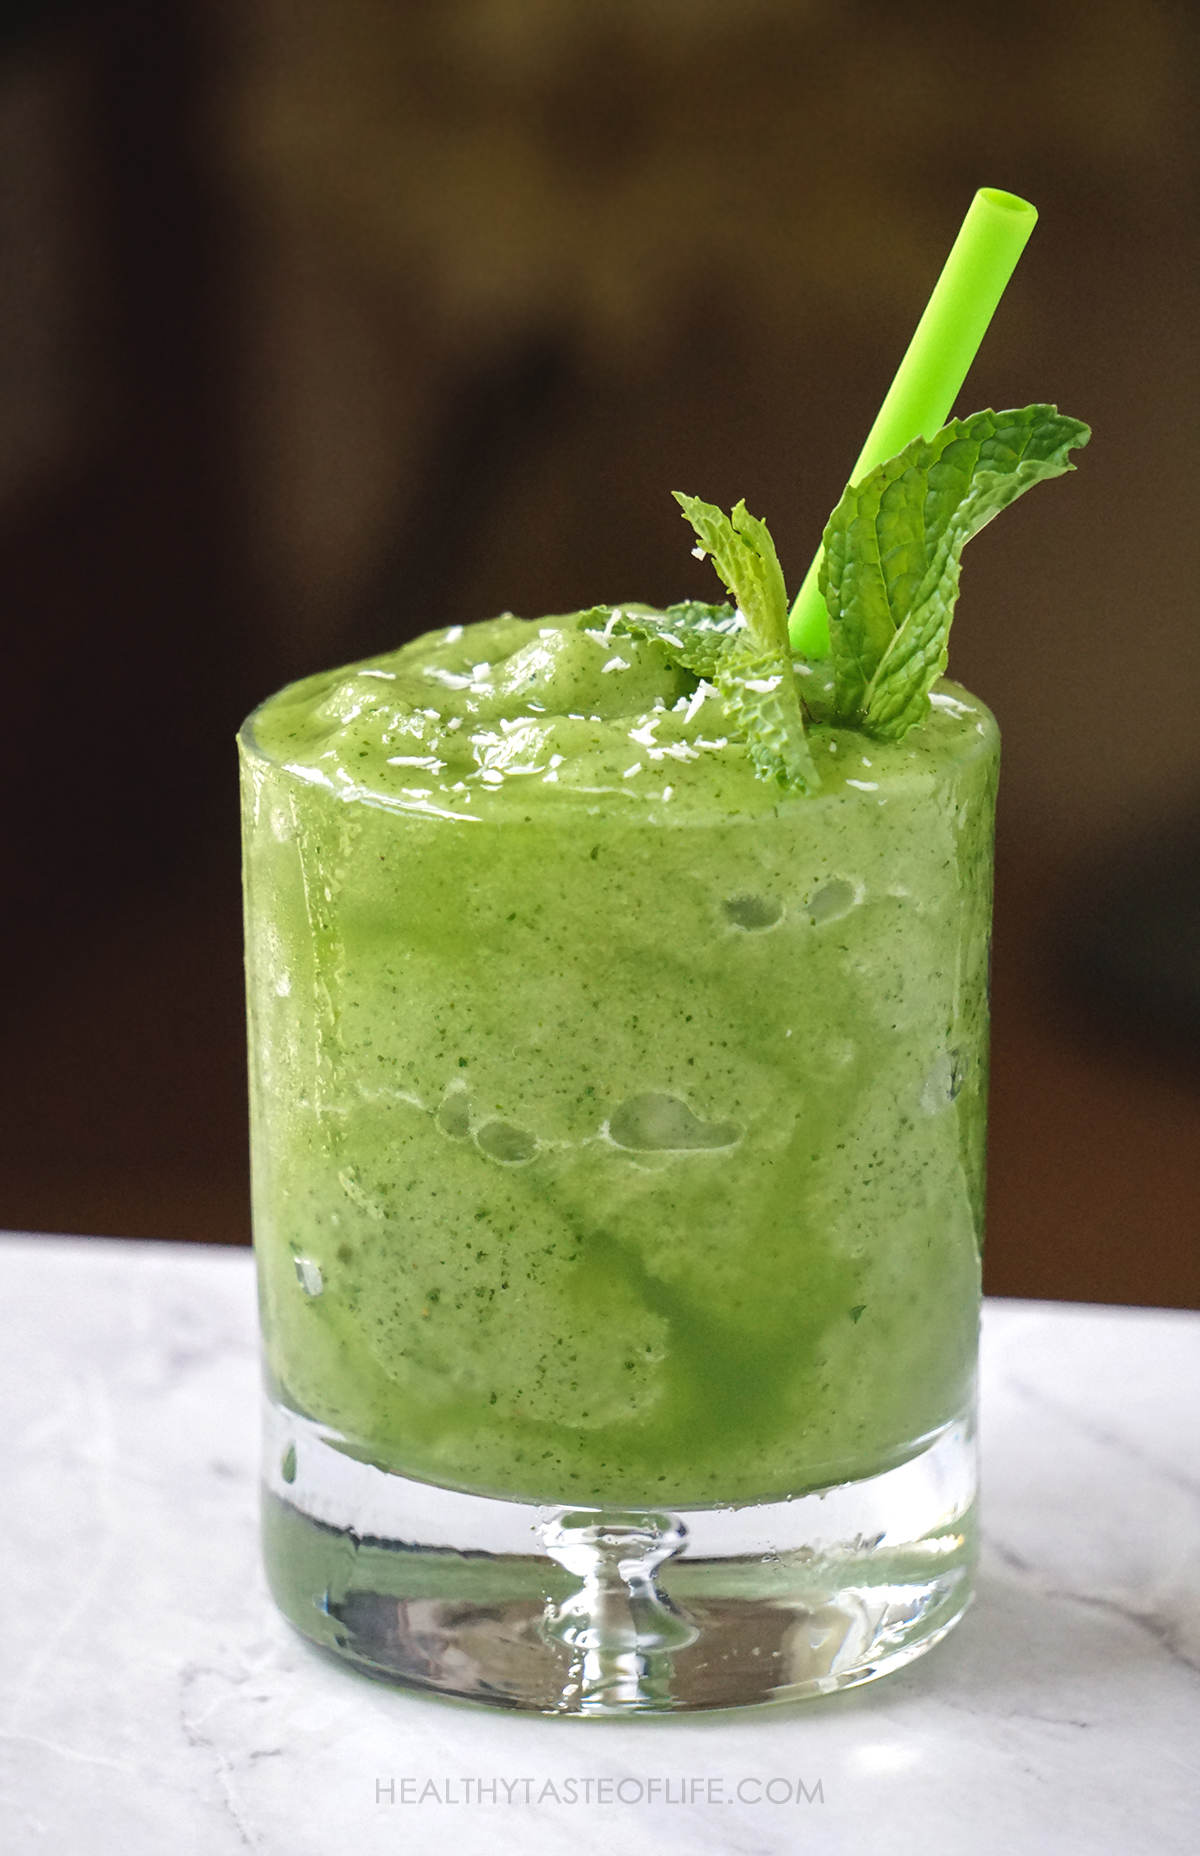 Honeydew smoothie with a thick consistency like slushy garnished with mint.